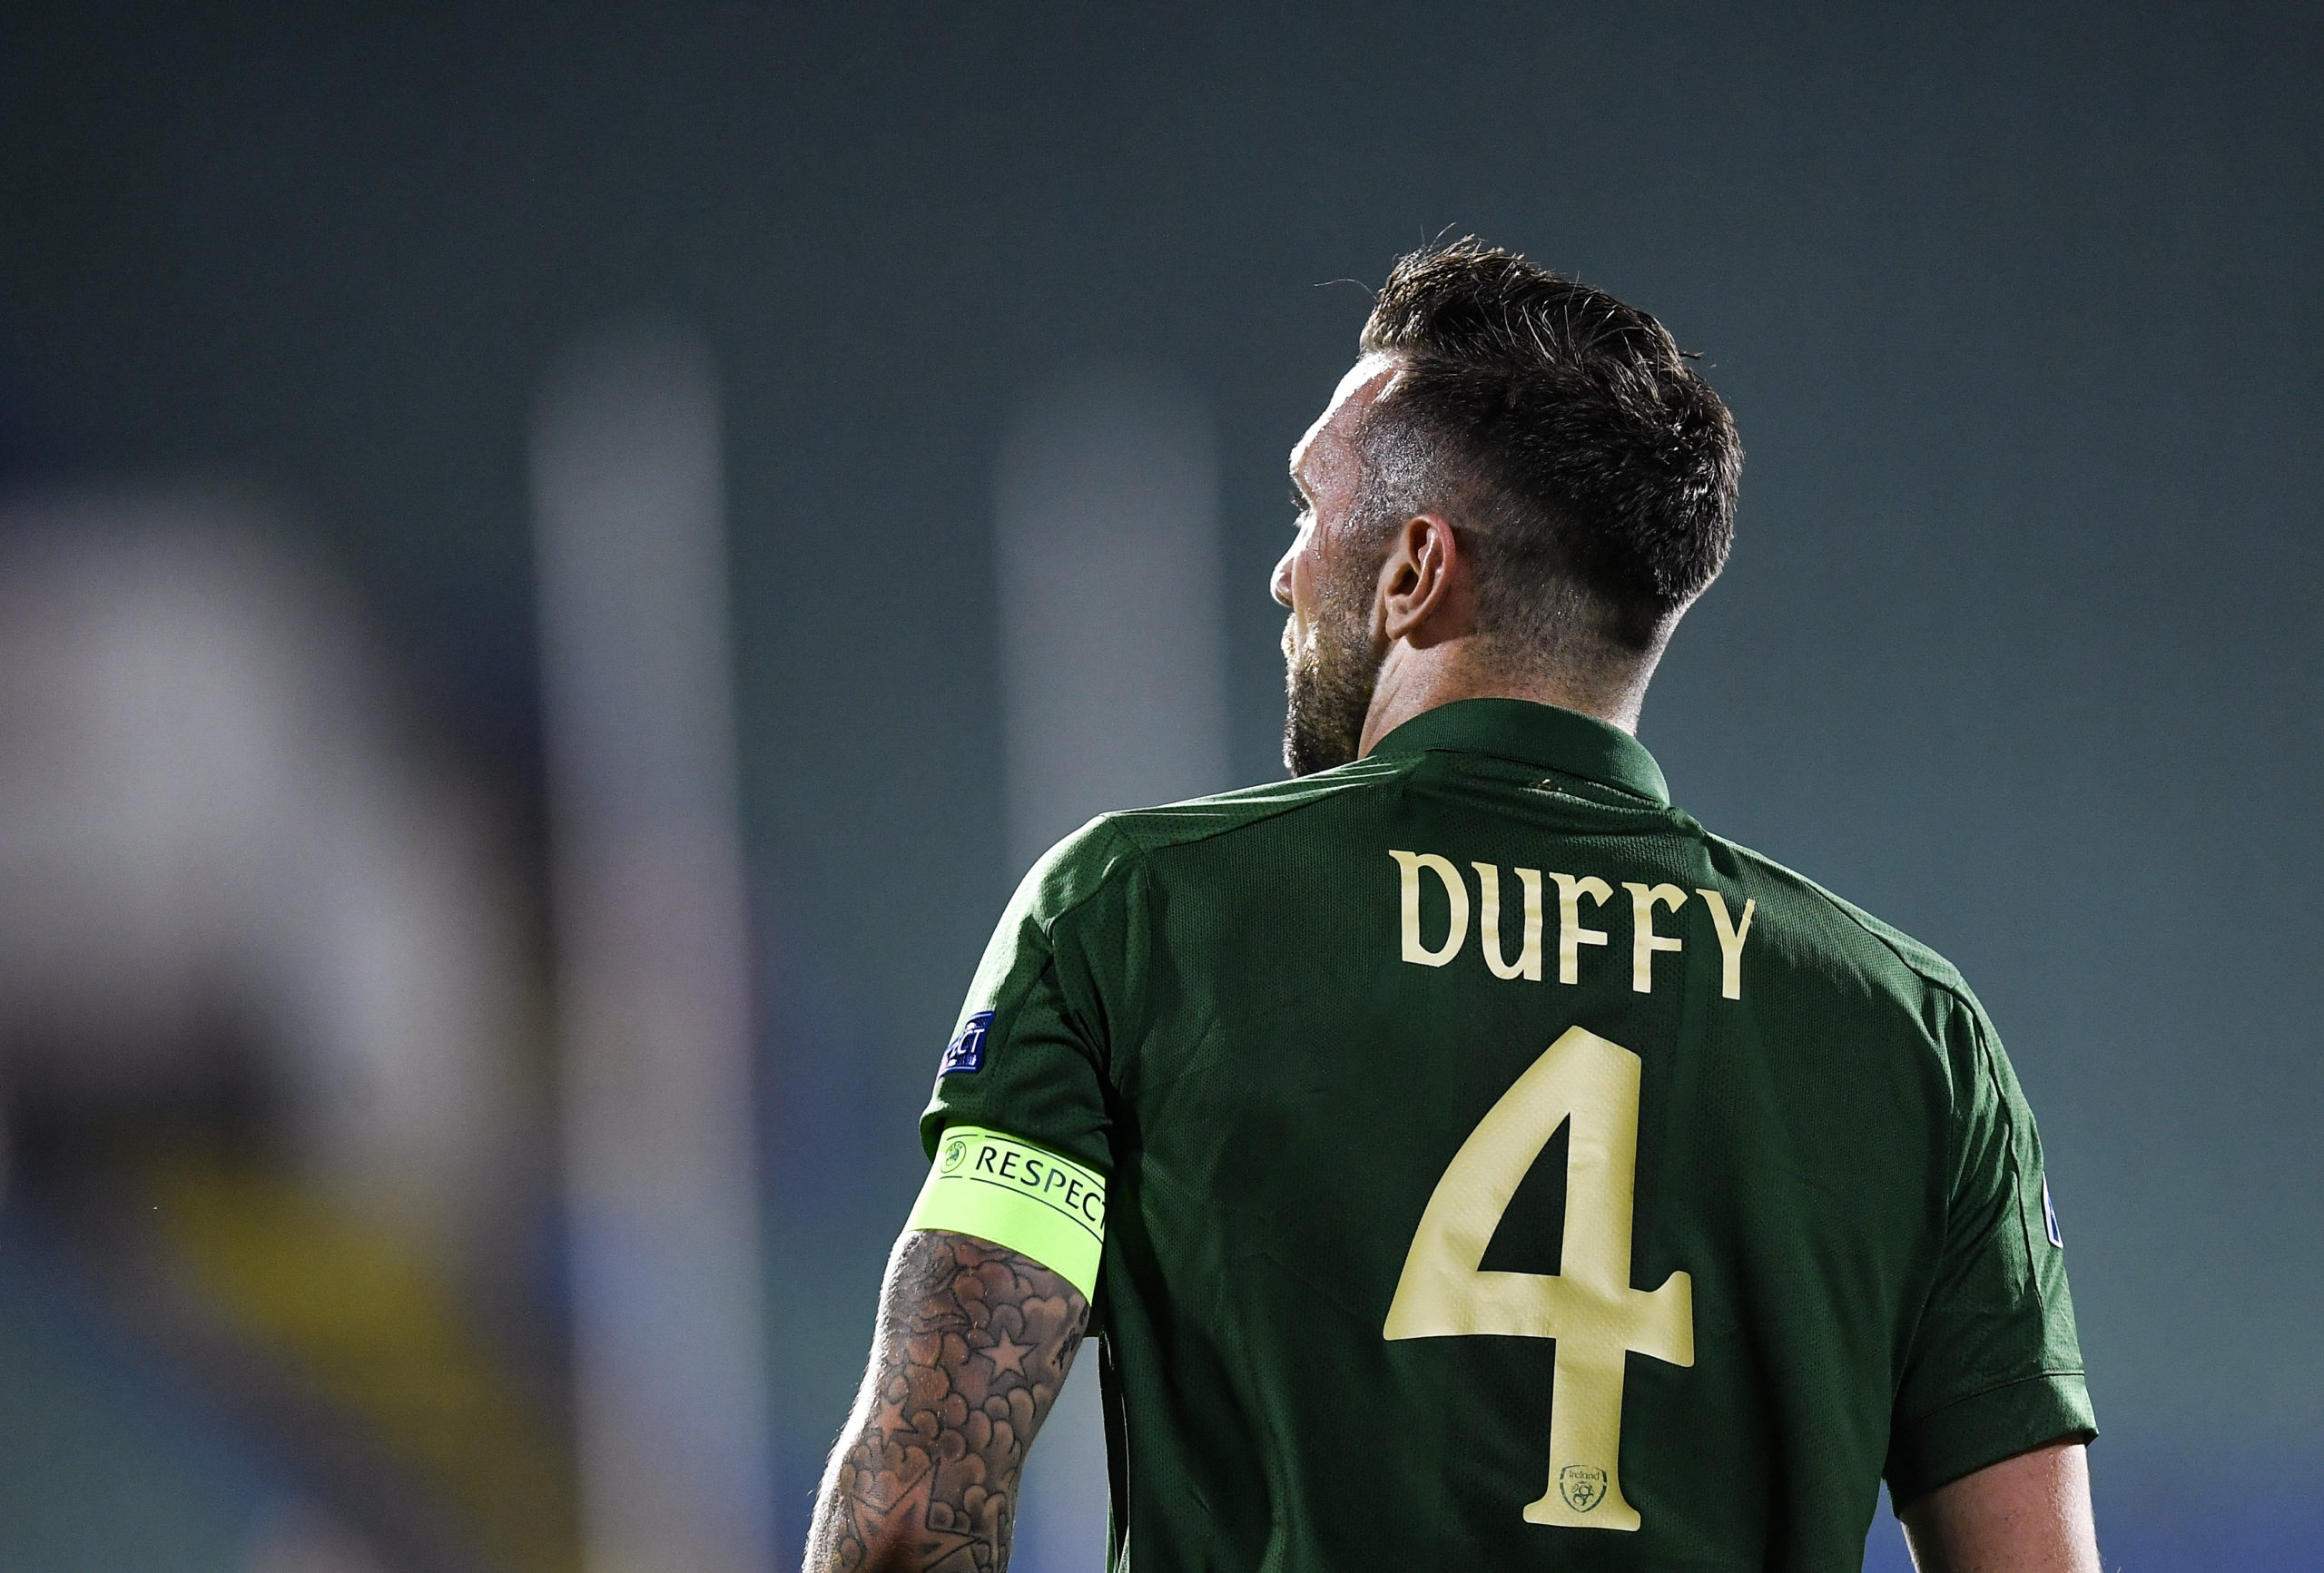 A Shane Duffy 'will he, won't he' permanent Celtic signing saga can't develop; he dodged first questions perfectly